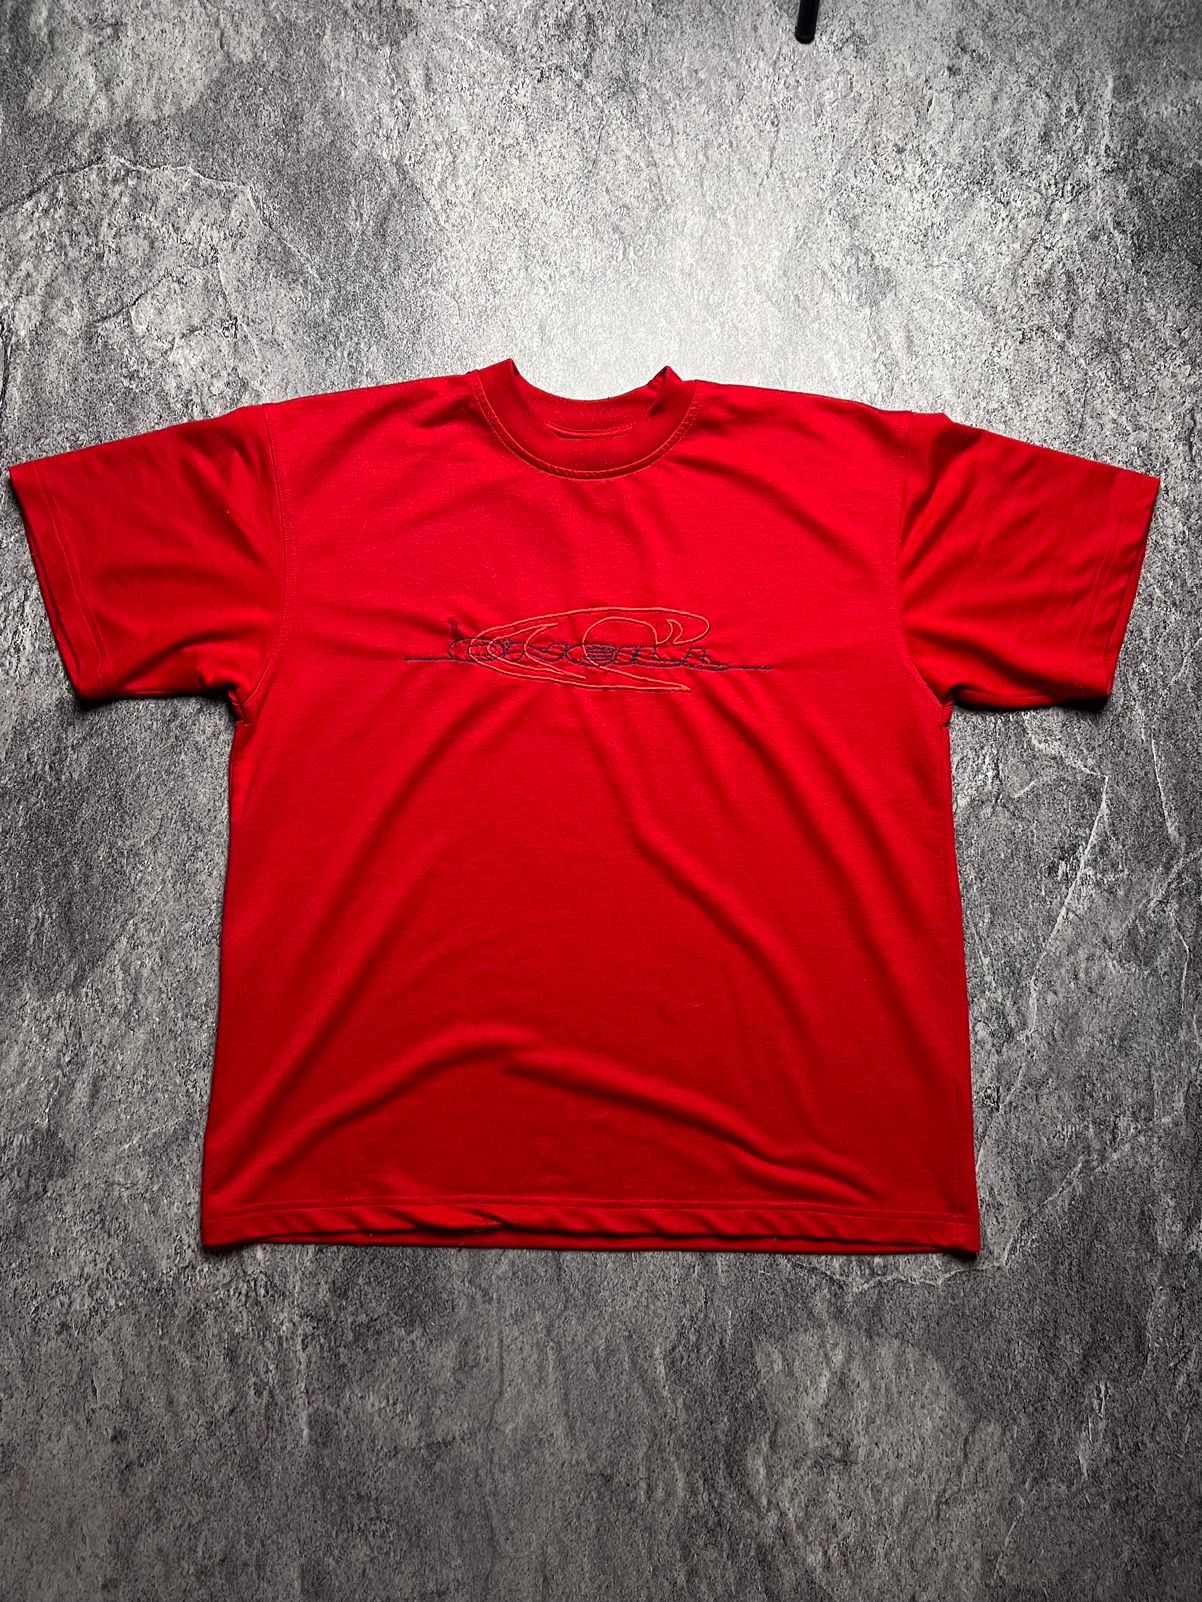 Pre-owned Oneill X Surf Style 90's O'neill Quiksilver Surf Japan Style Big Logo Tee In Red